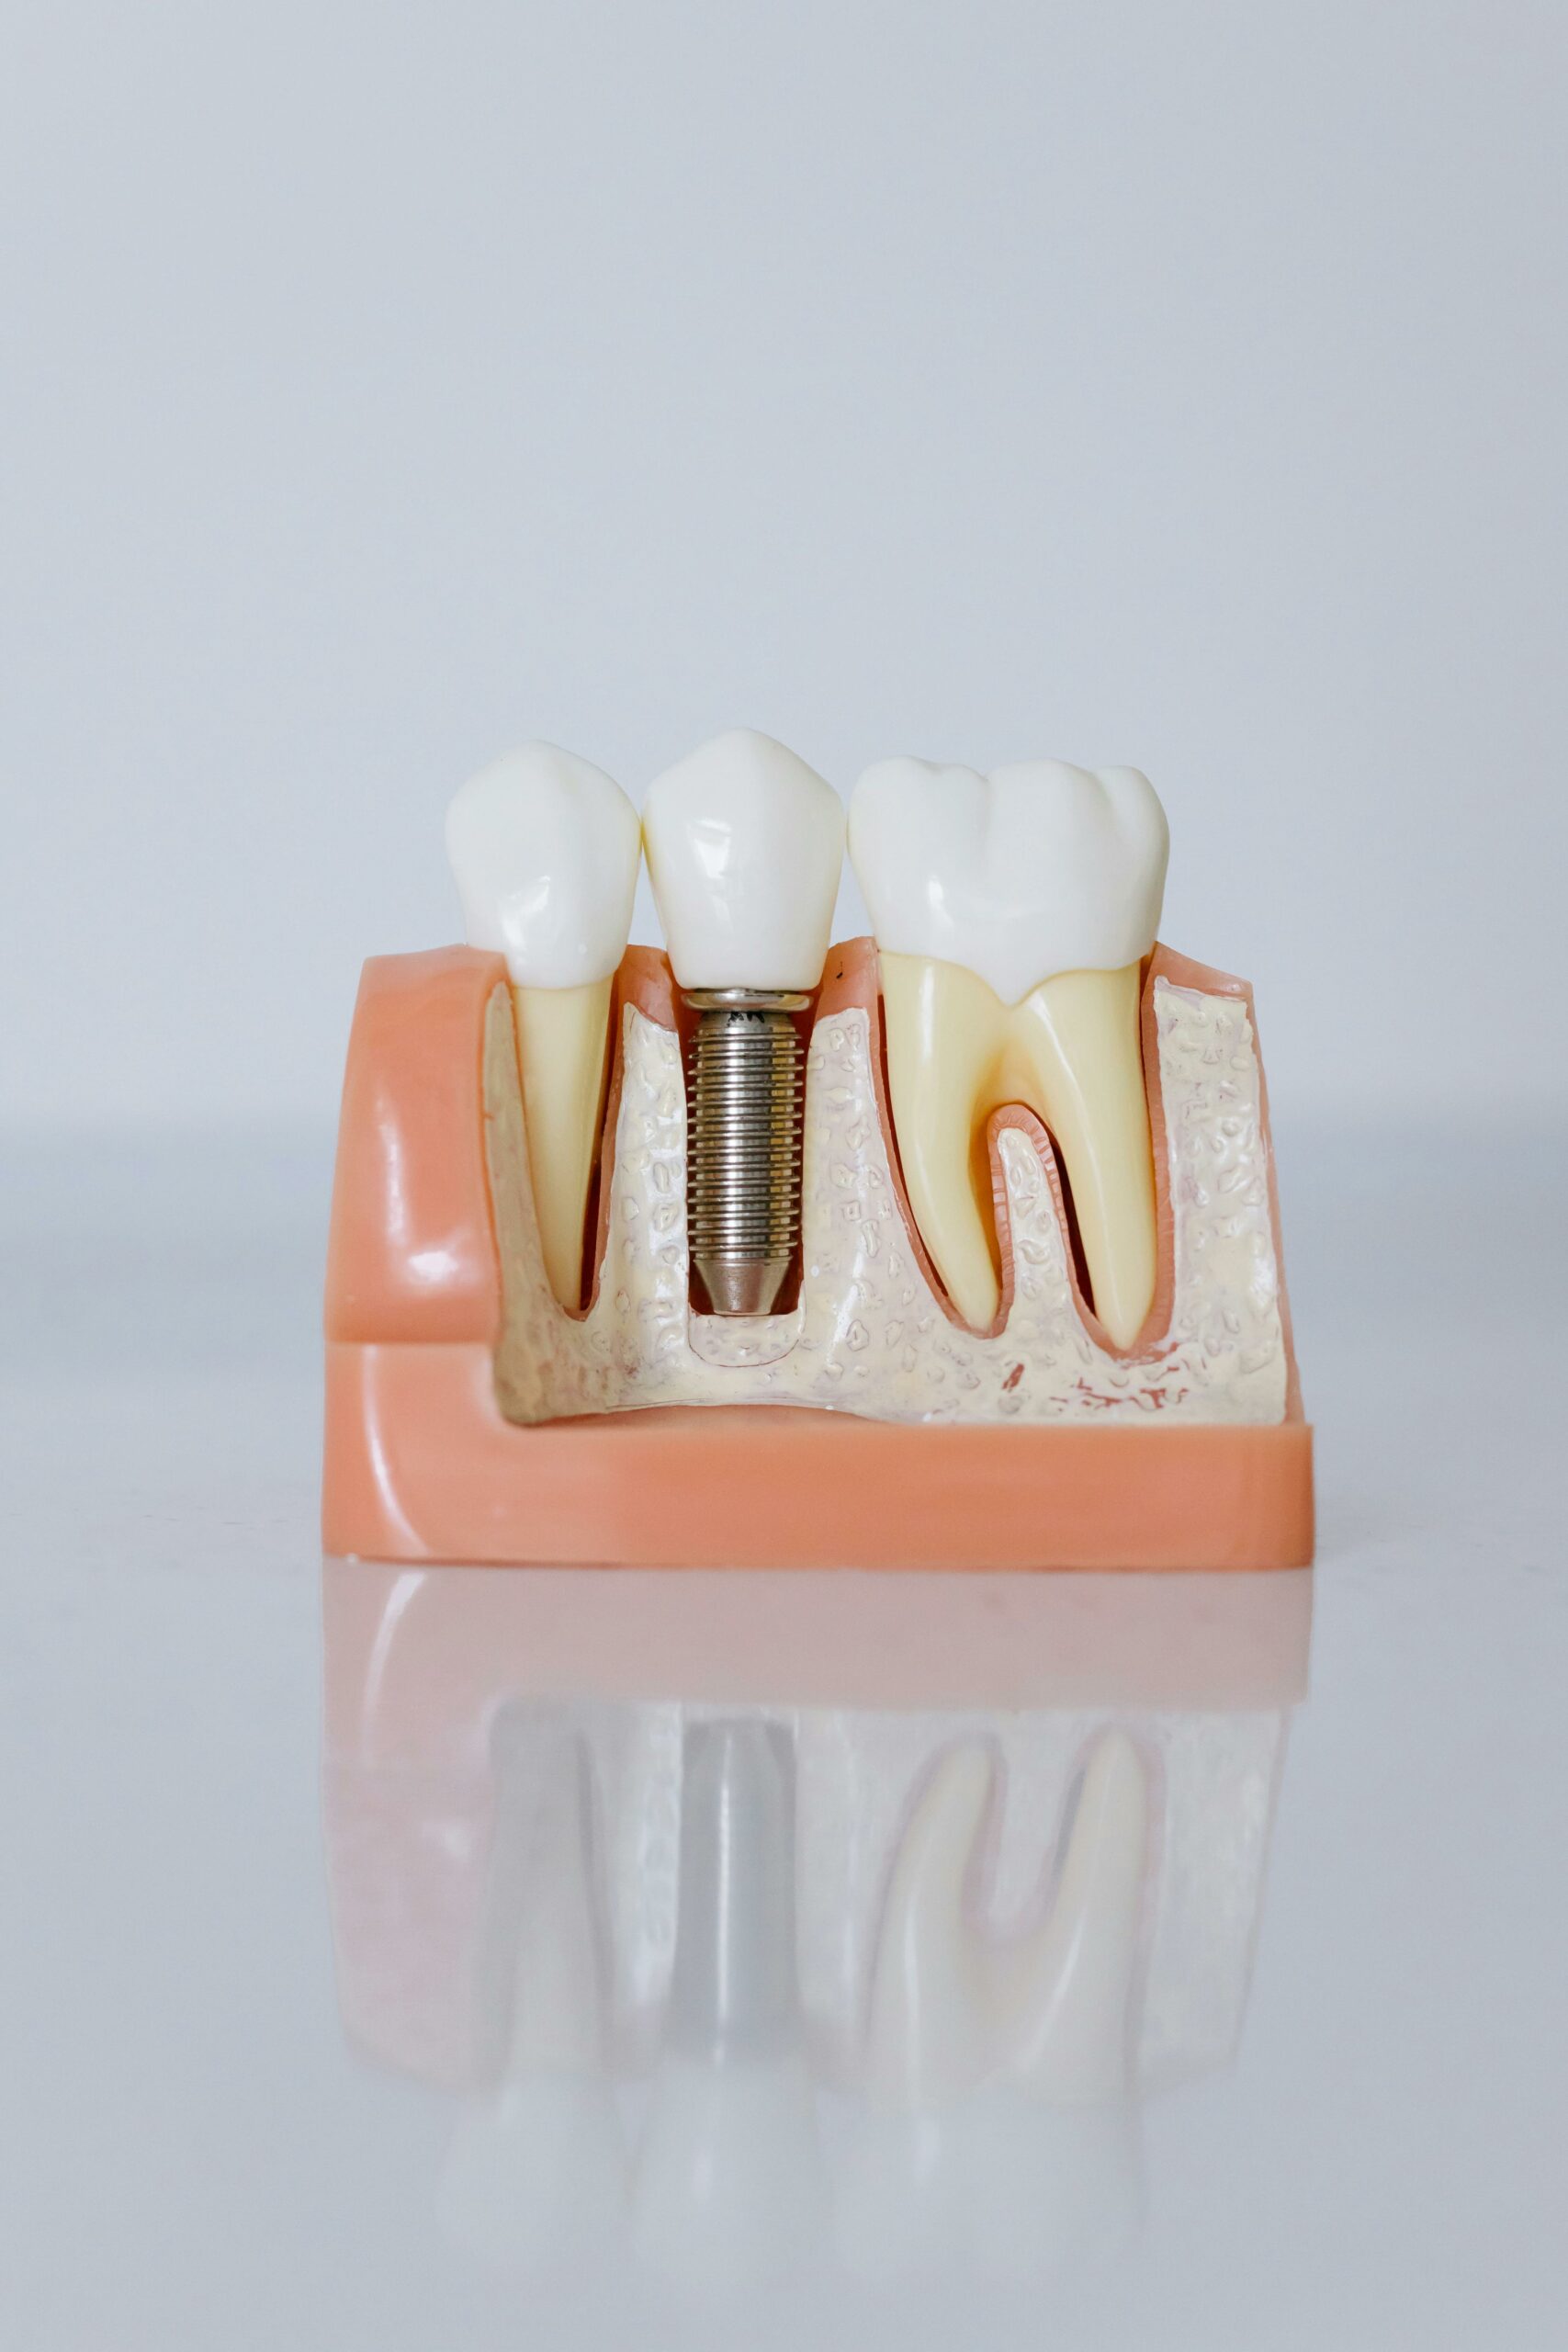 How much do dental implants cost in Charlotte NC?